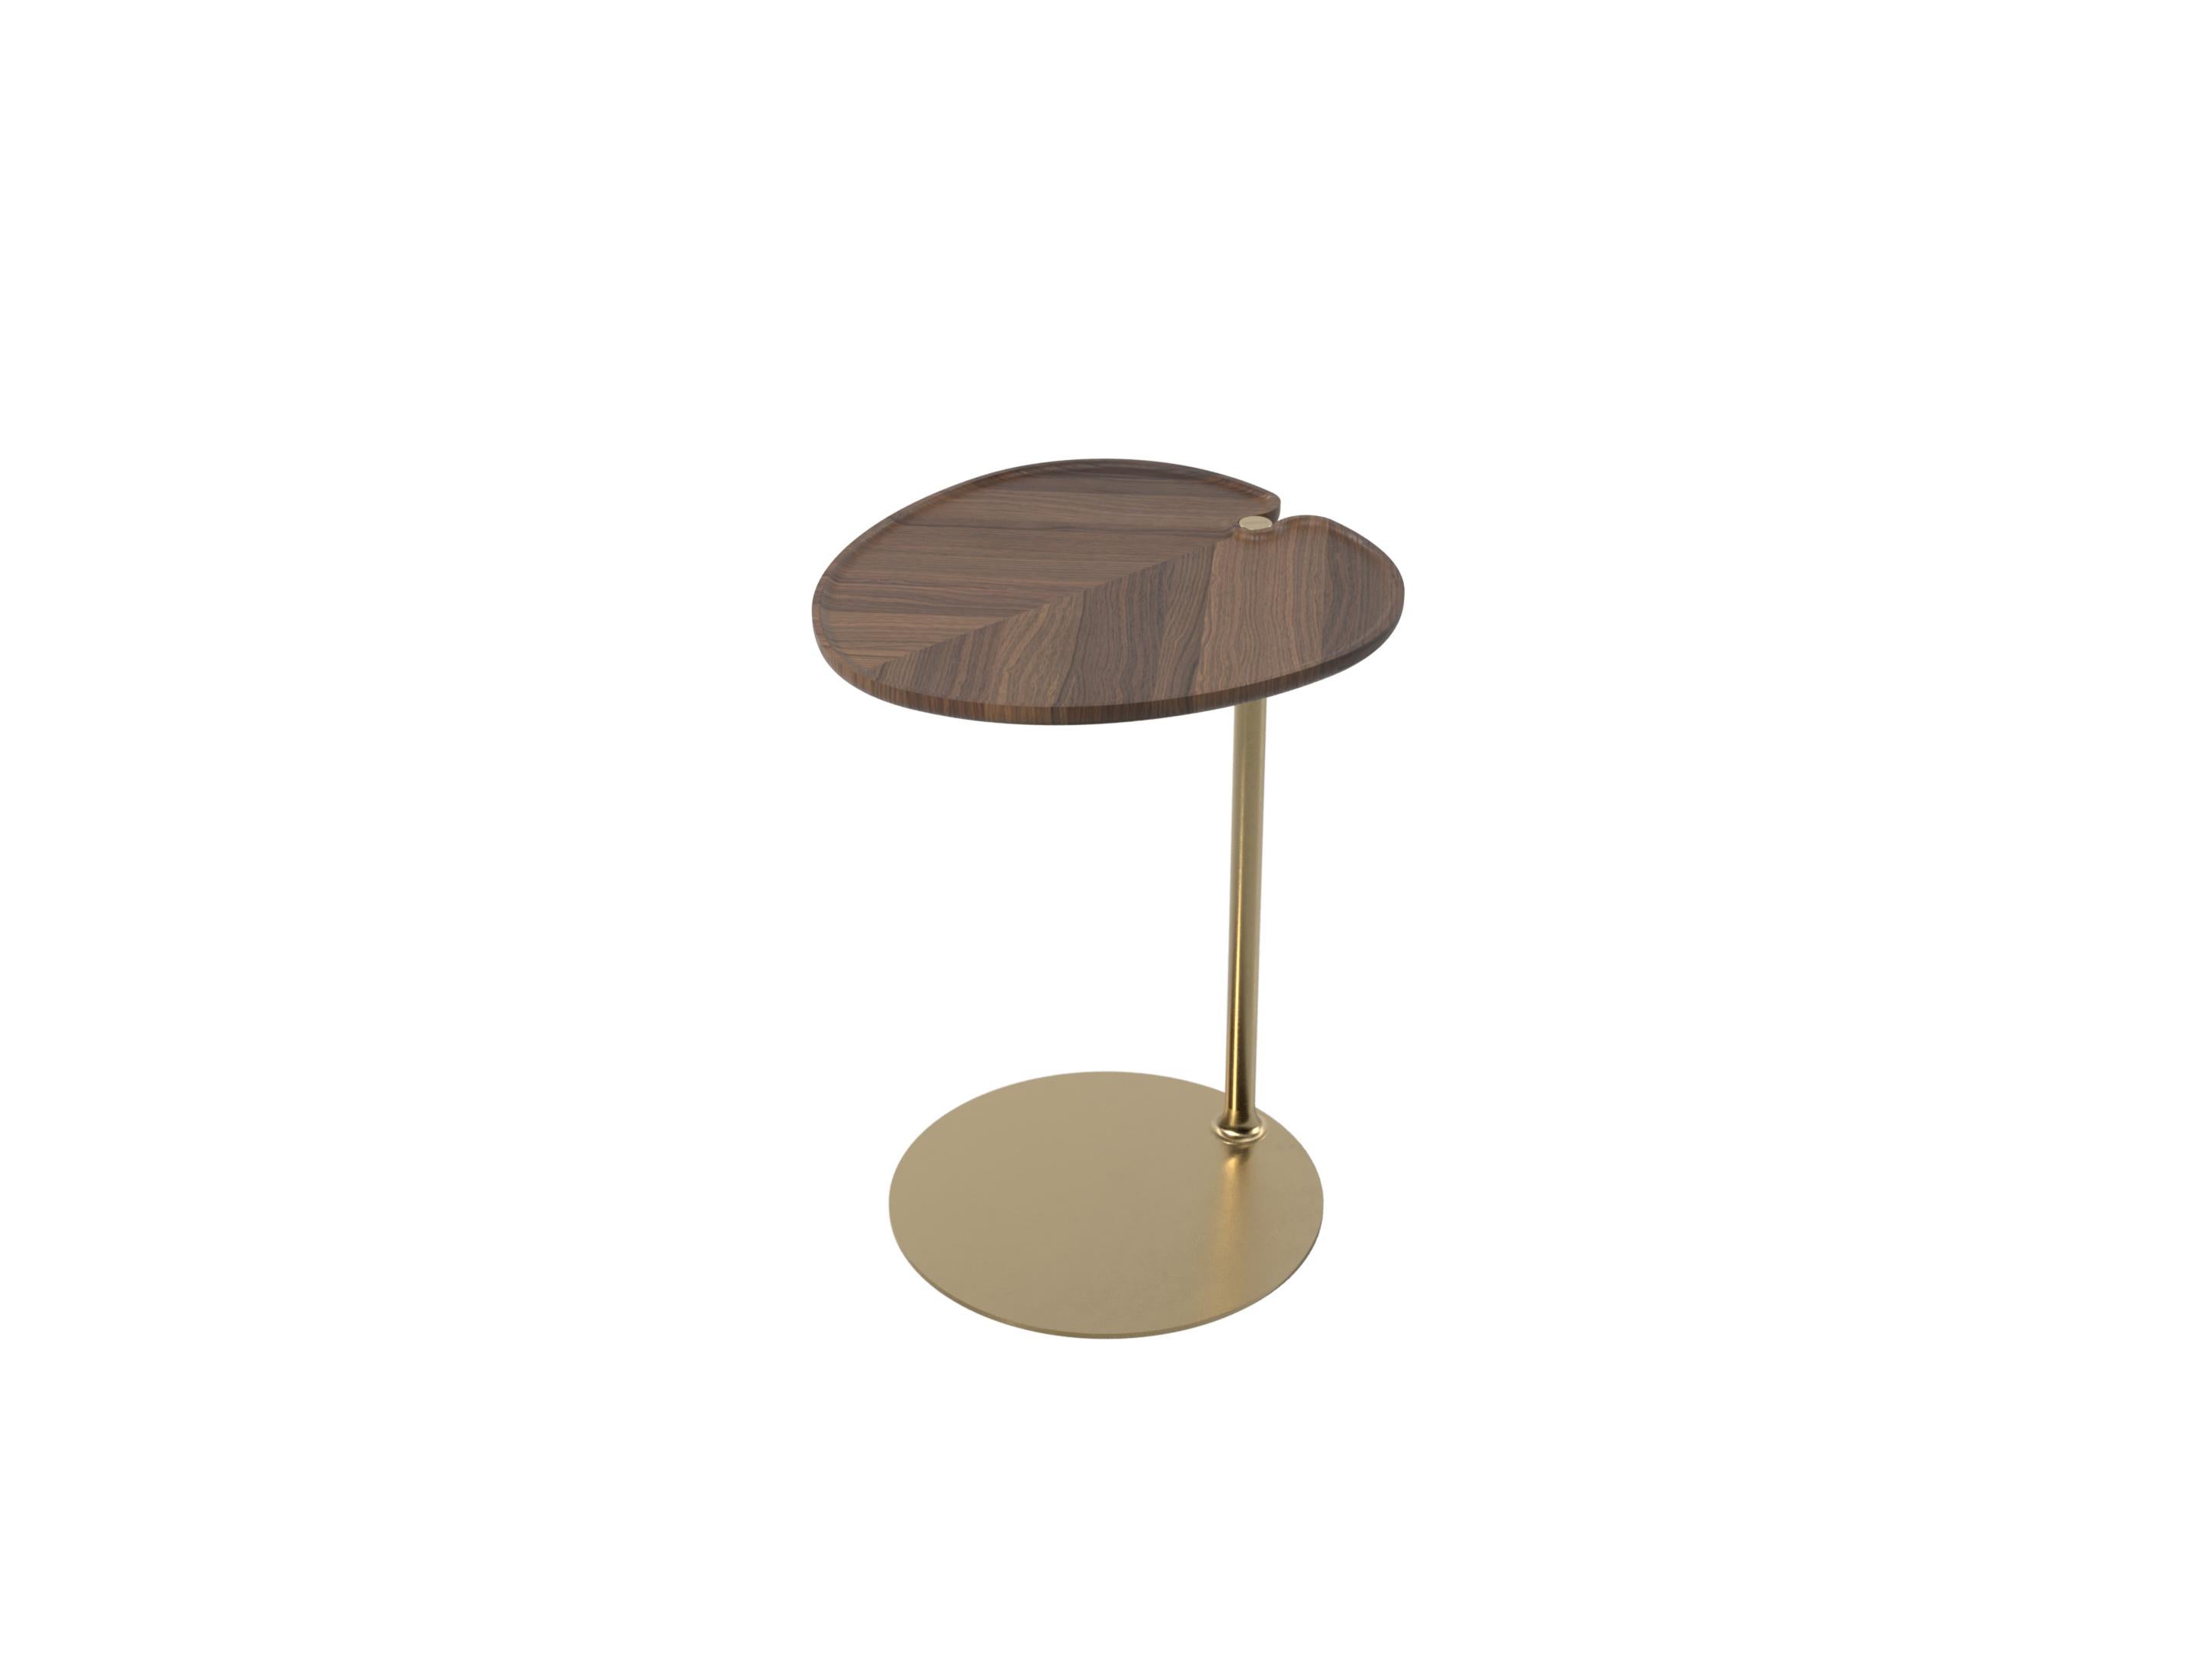 Leaf 1 oval side table by Mathias De Ferm.
Dimensions: D 42 x W 40 x H 55.5 cm.
Materials: Walnut wood, brass.
Also available in different materials. 
 
LEAF-shaped walnut/oak tabletops revolve around a sleek brass base with a carefully crafted